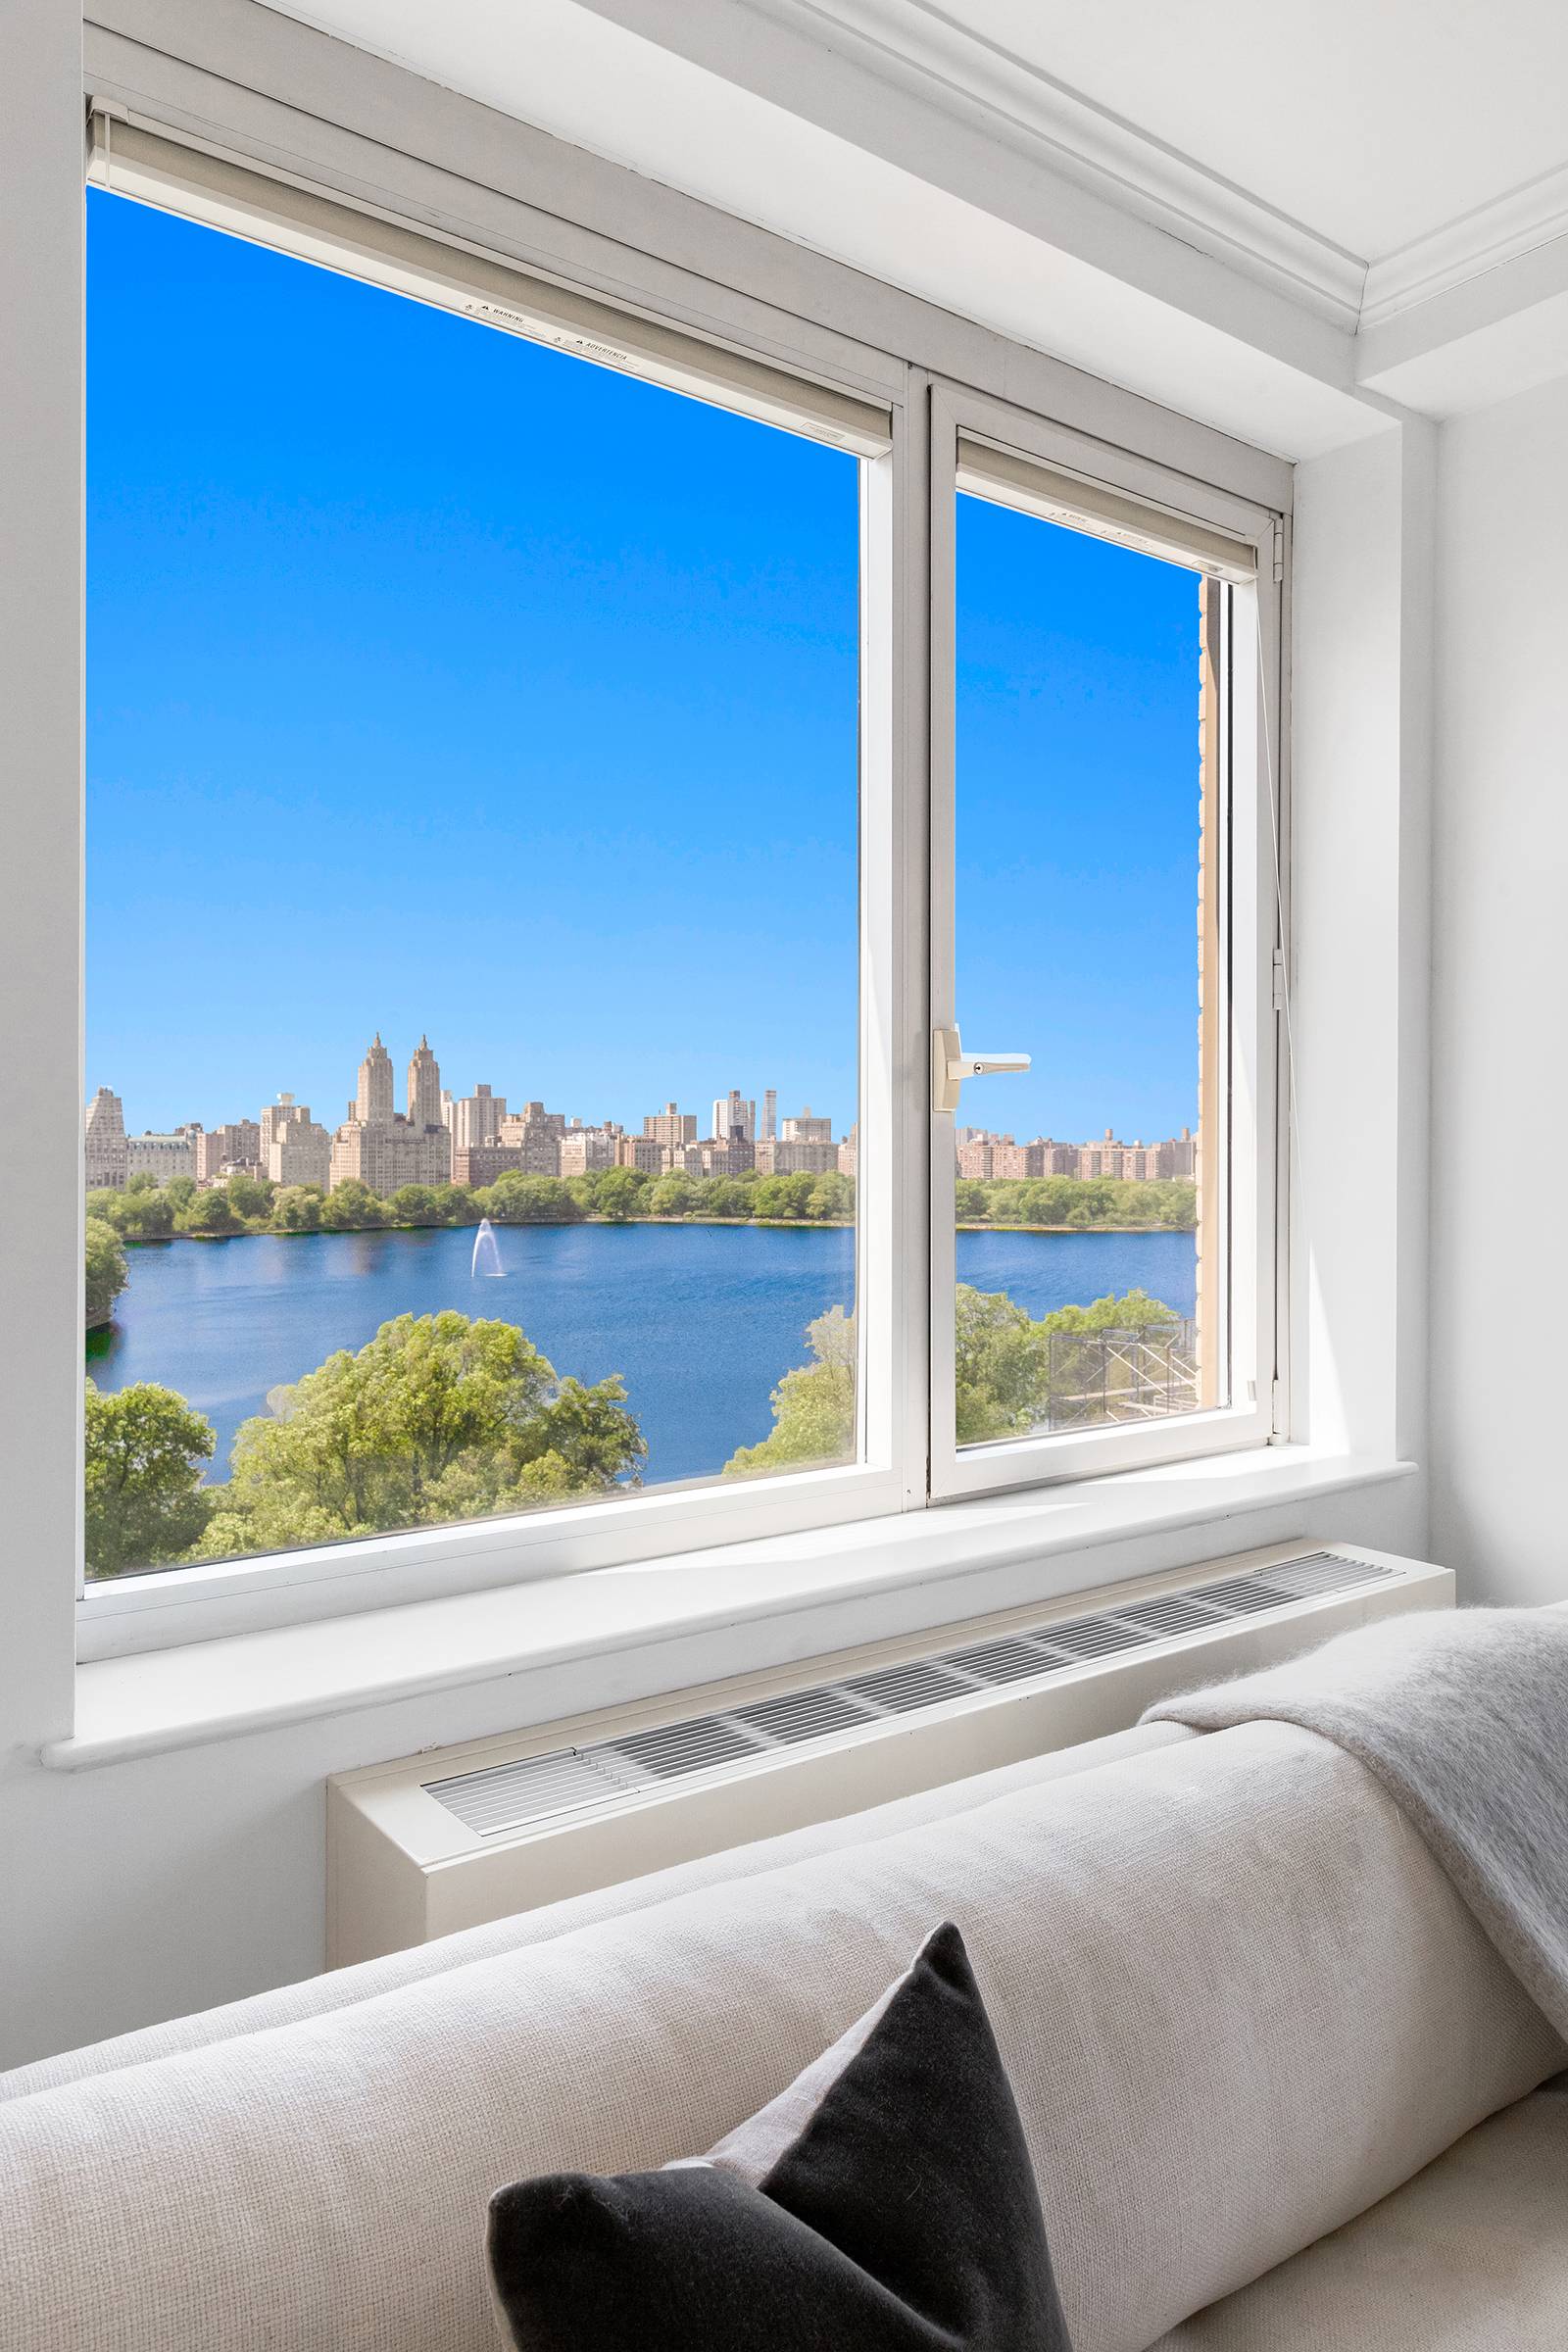 Introducing a Rare Fifth Avenue 3 4 Bedroom Condo on Museum Mile with Breathtaking Direct Views of the Reservoir amp ; Central Park with Two Substantial Private Outdoor Terraces Welcome ...